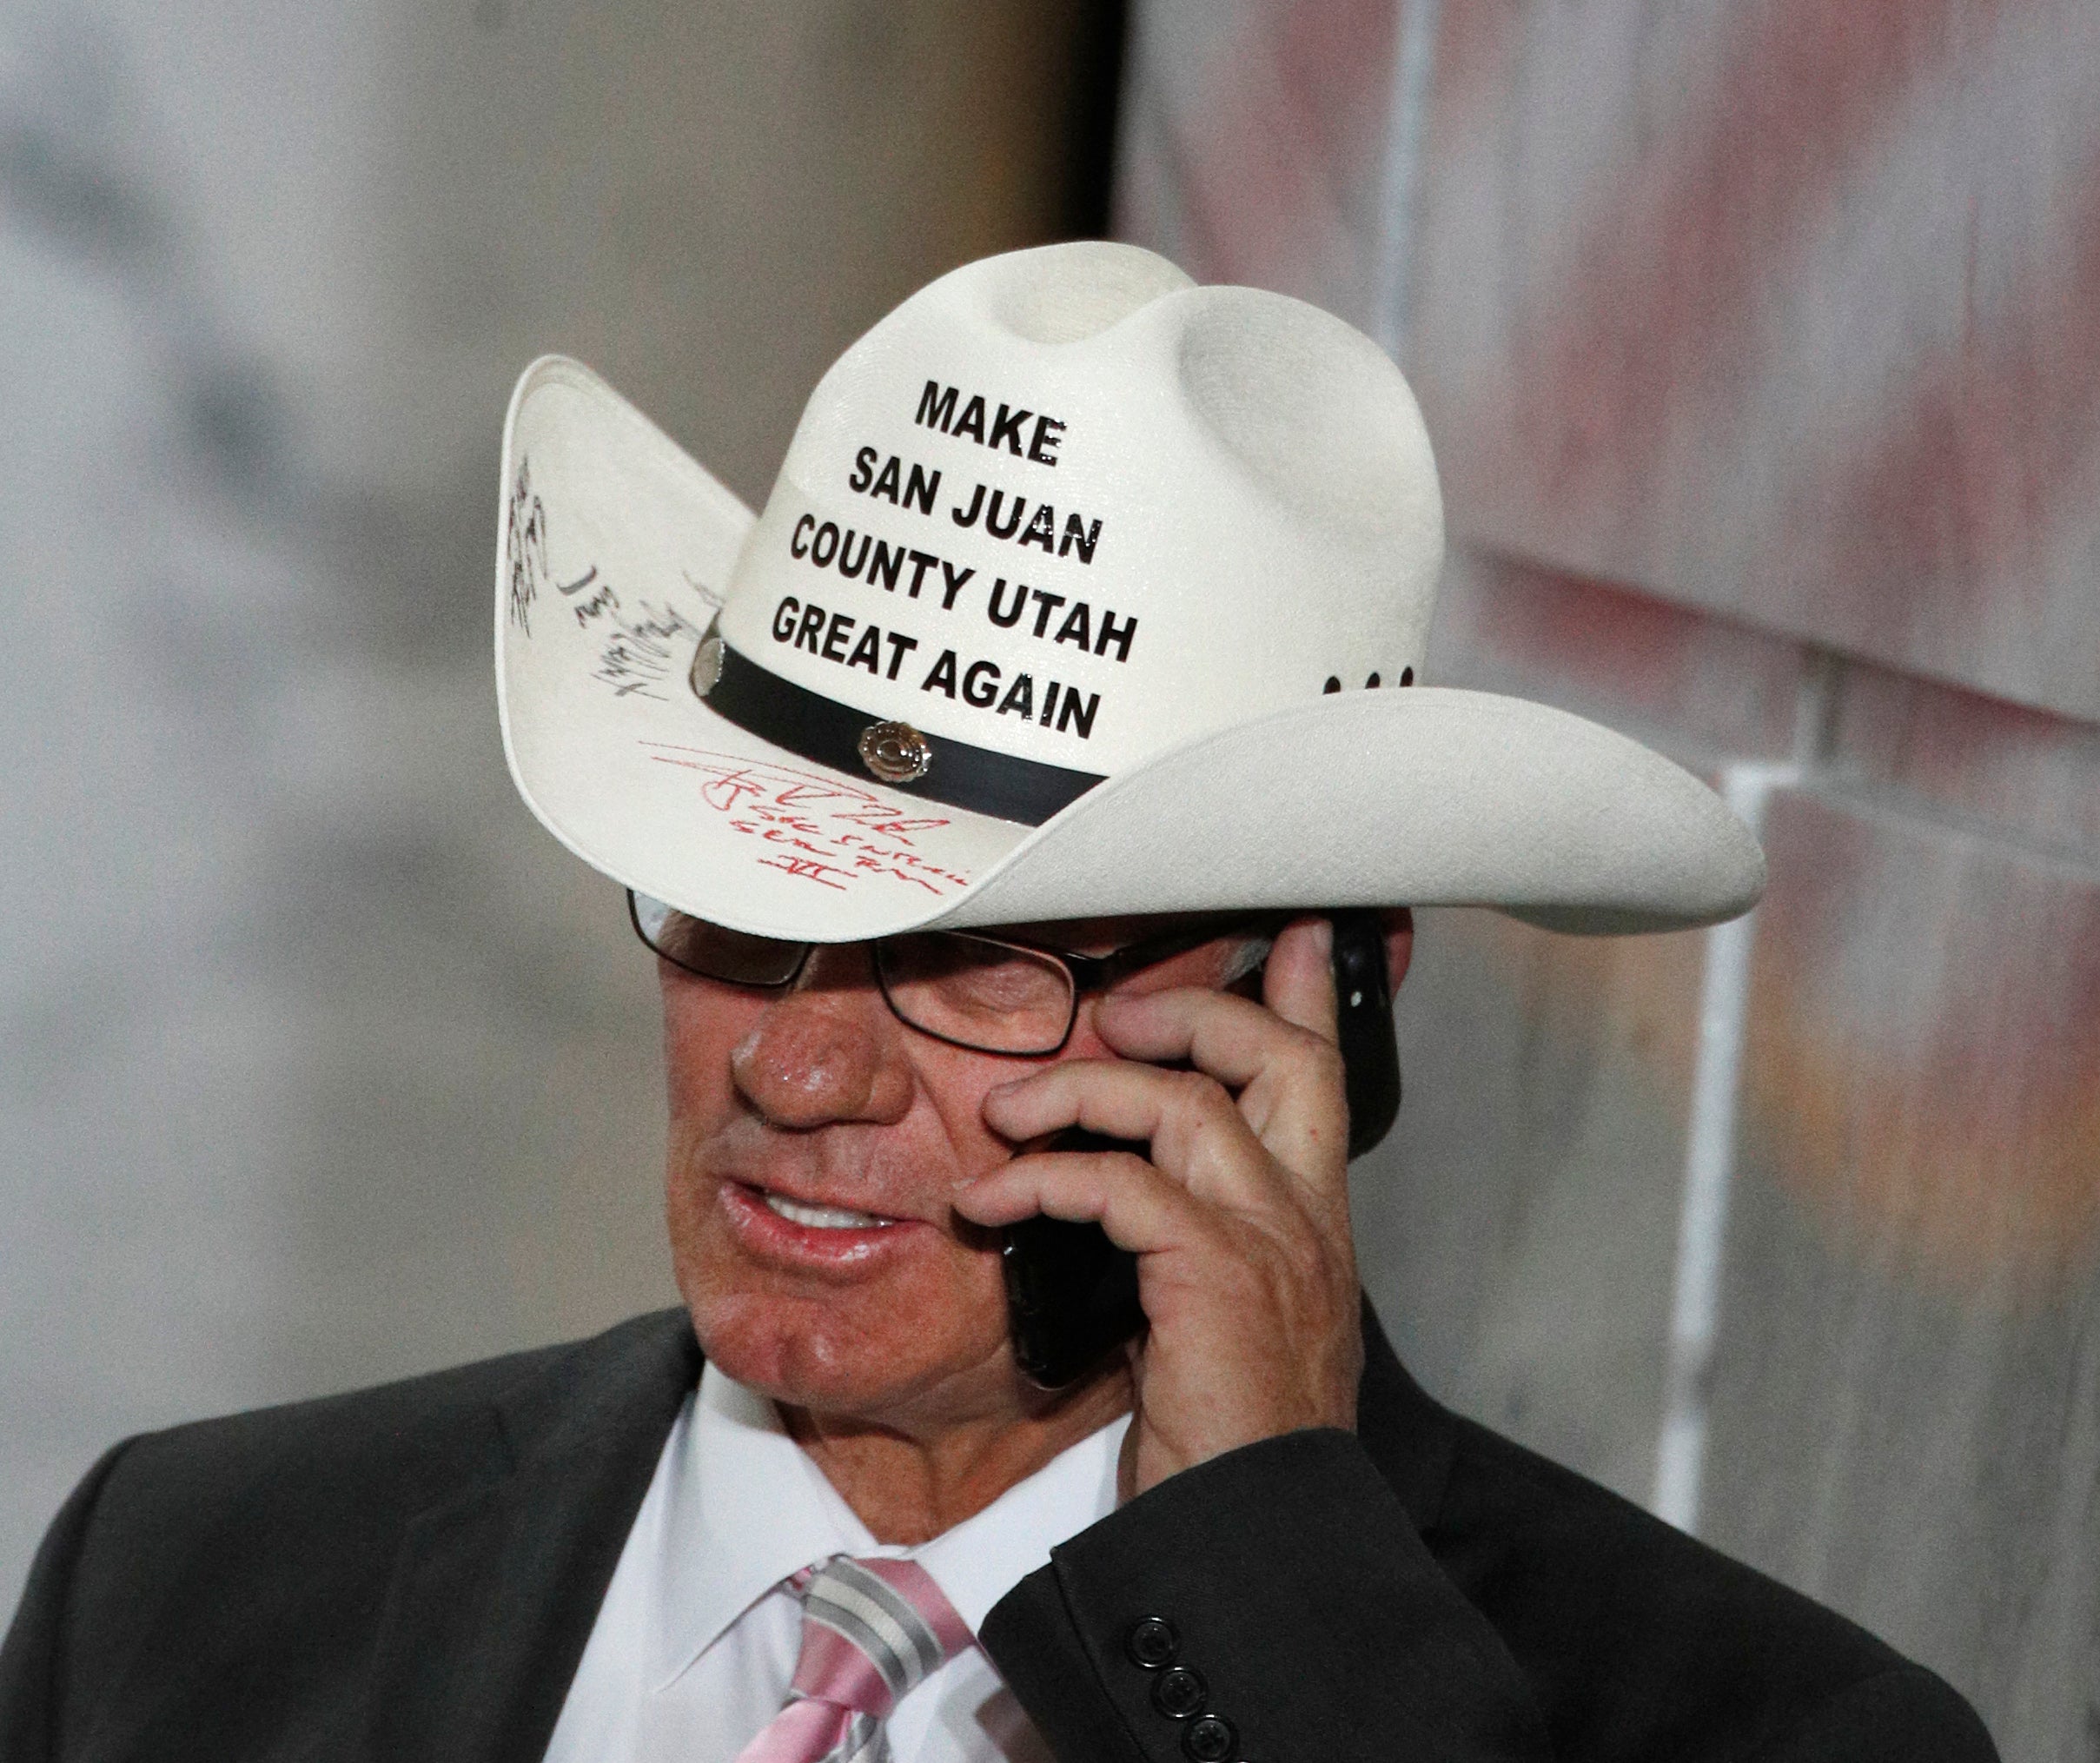 Bruce Adams, Chairman of the San Juan County Commission, talks on the phone before a event with U.S. President Donald Trump at the Rotunda of the Utah State Capitol on December 4, 2017